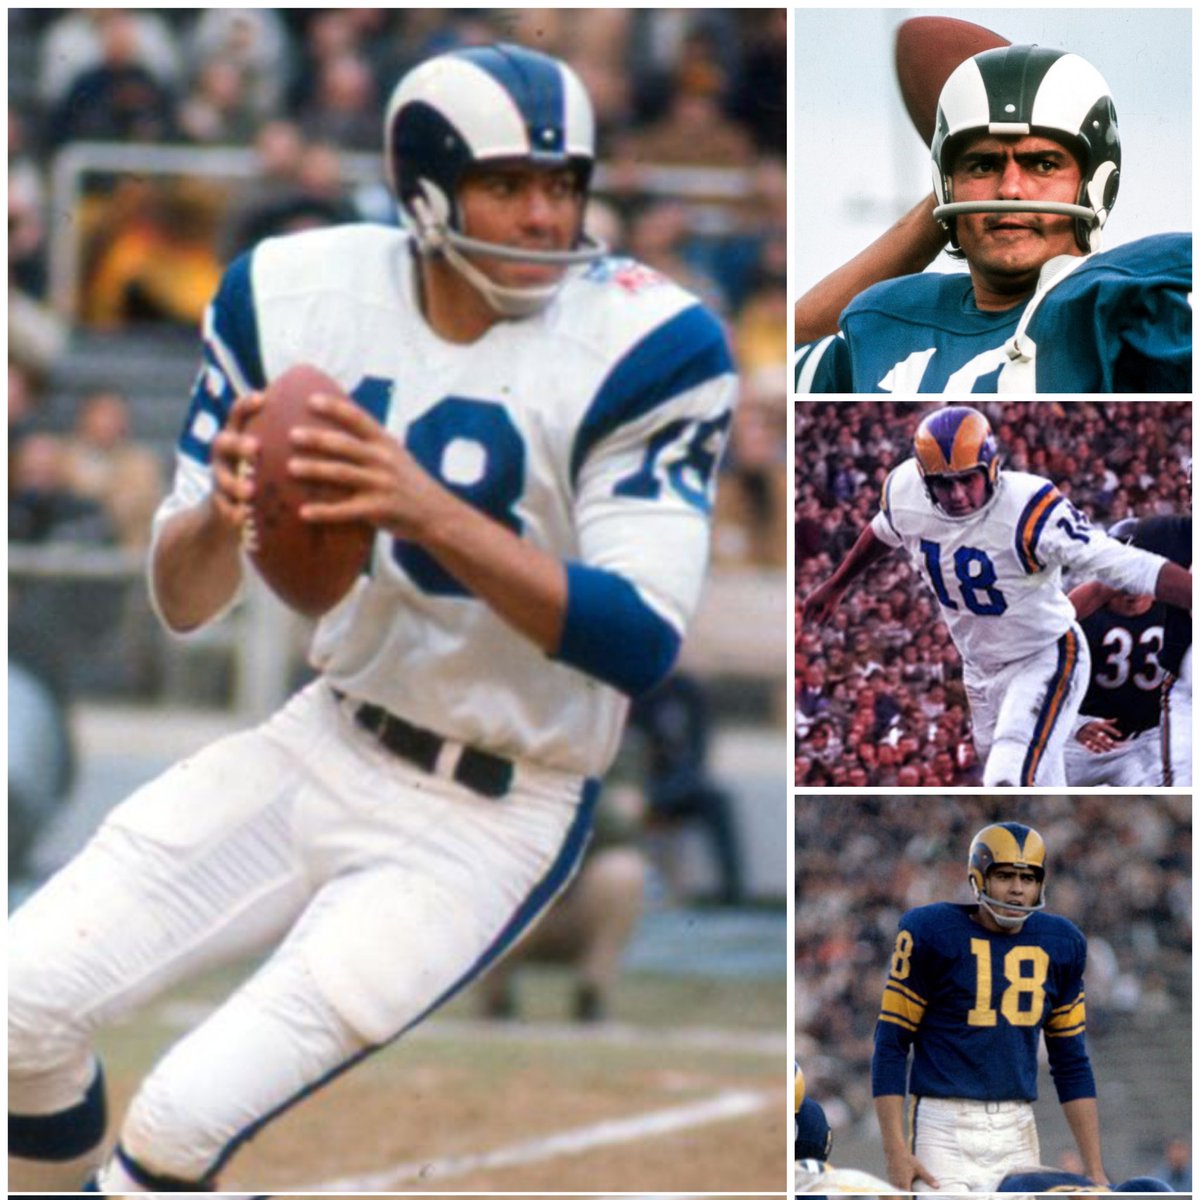 @SamWithTheRams @RamsNFL @JB_Long @Camwin11 @DMarcoFarr1 Sam - you know I respect you like no other. Love your recent tweets re: sharing history & educating fans. 

Speaking of team history, the team only tweeted one graphic re: passing of Roman Gabriel. That is unforgivable. My disgust over that led me to cancel plans to attend party.